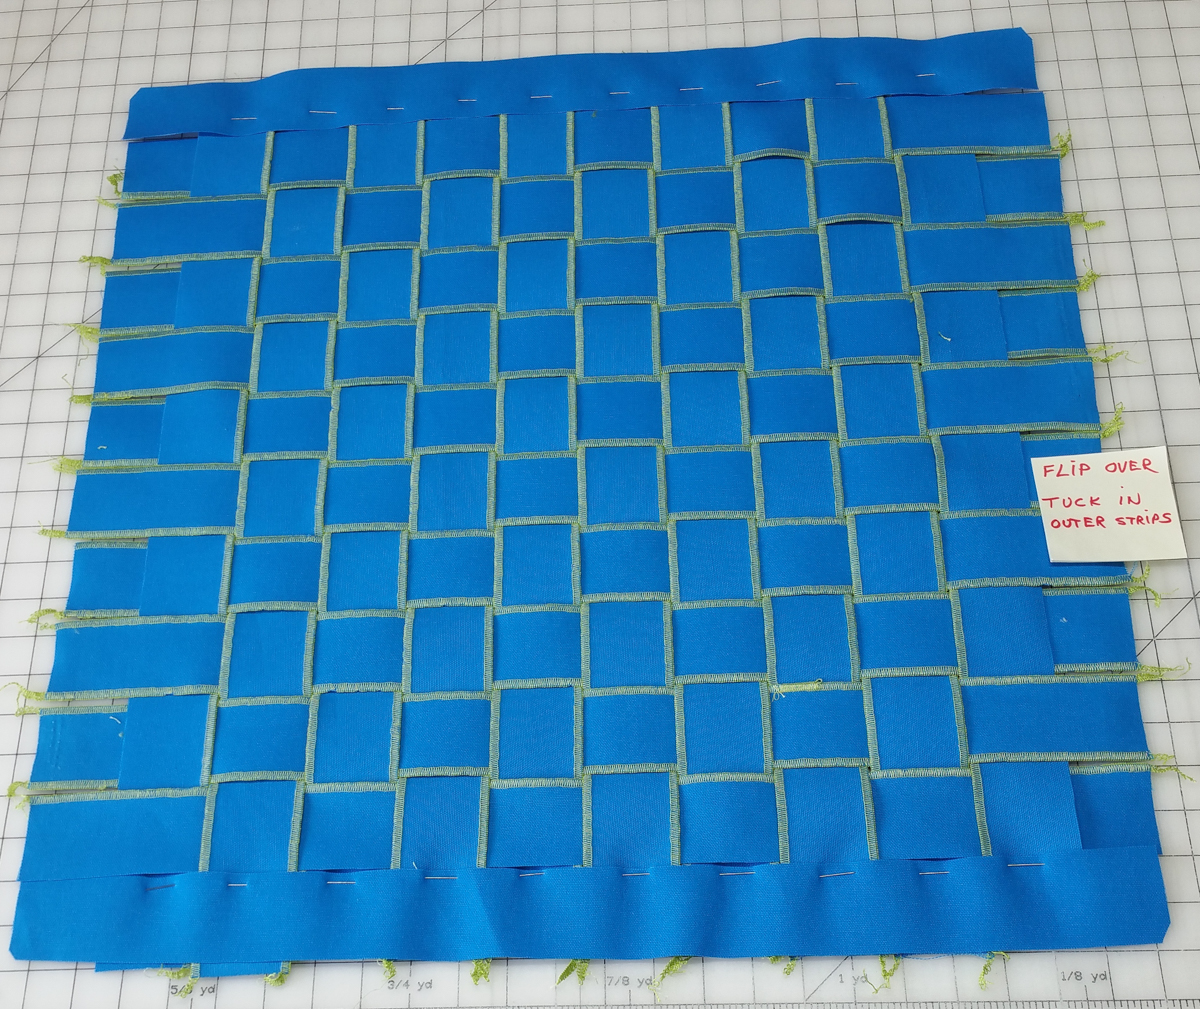 Flange Pillow Tutorial-tuck in outer weaves